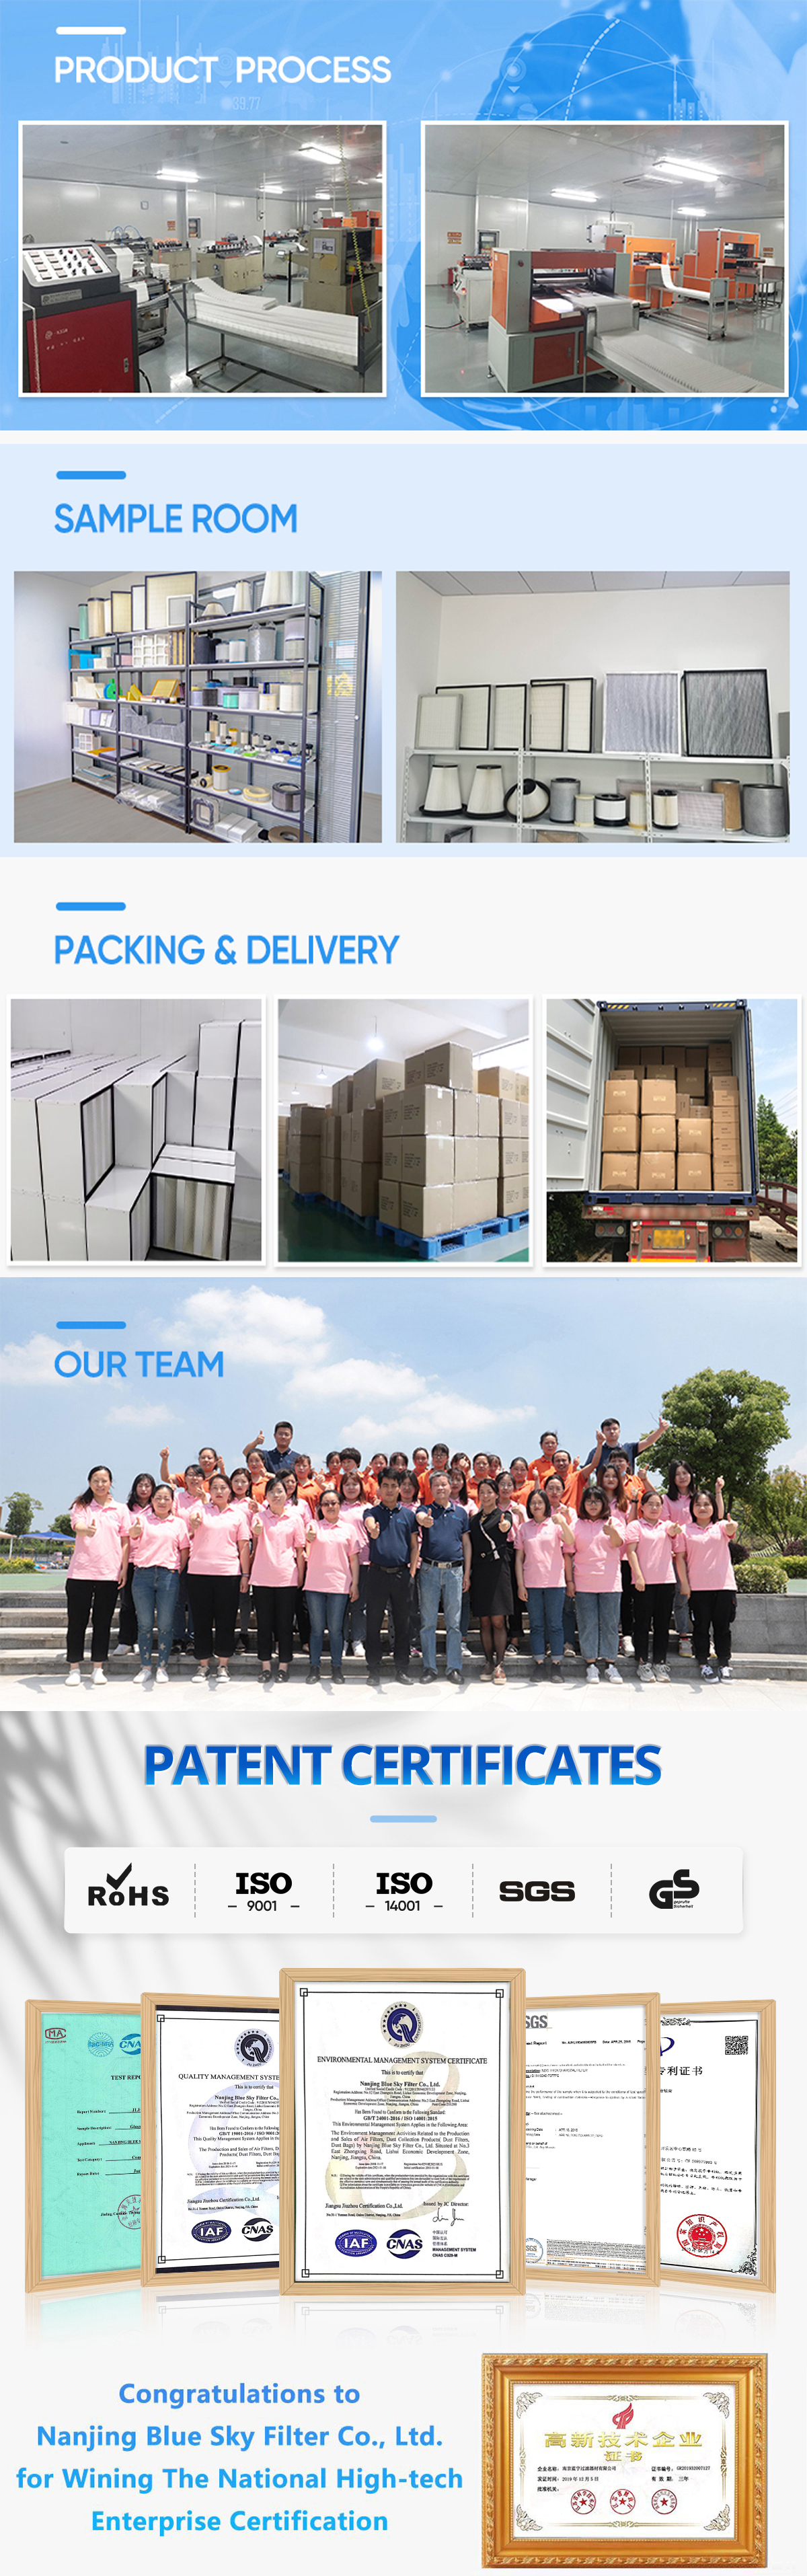 Product Line and Delivery Process of Our Company Blue Sky Filter